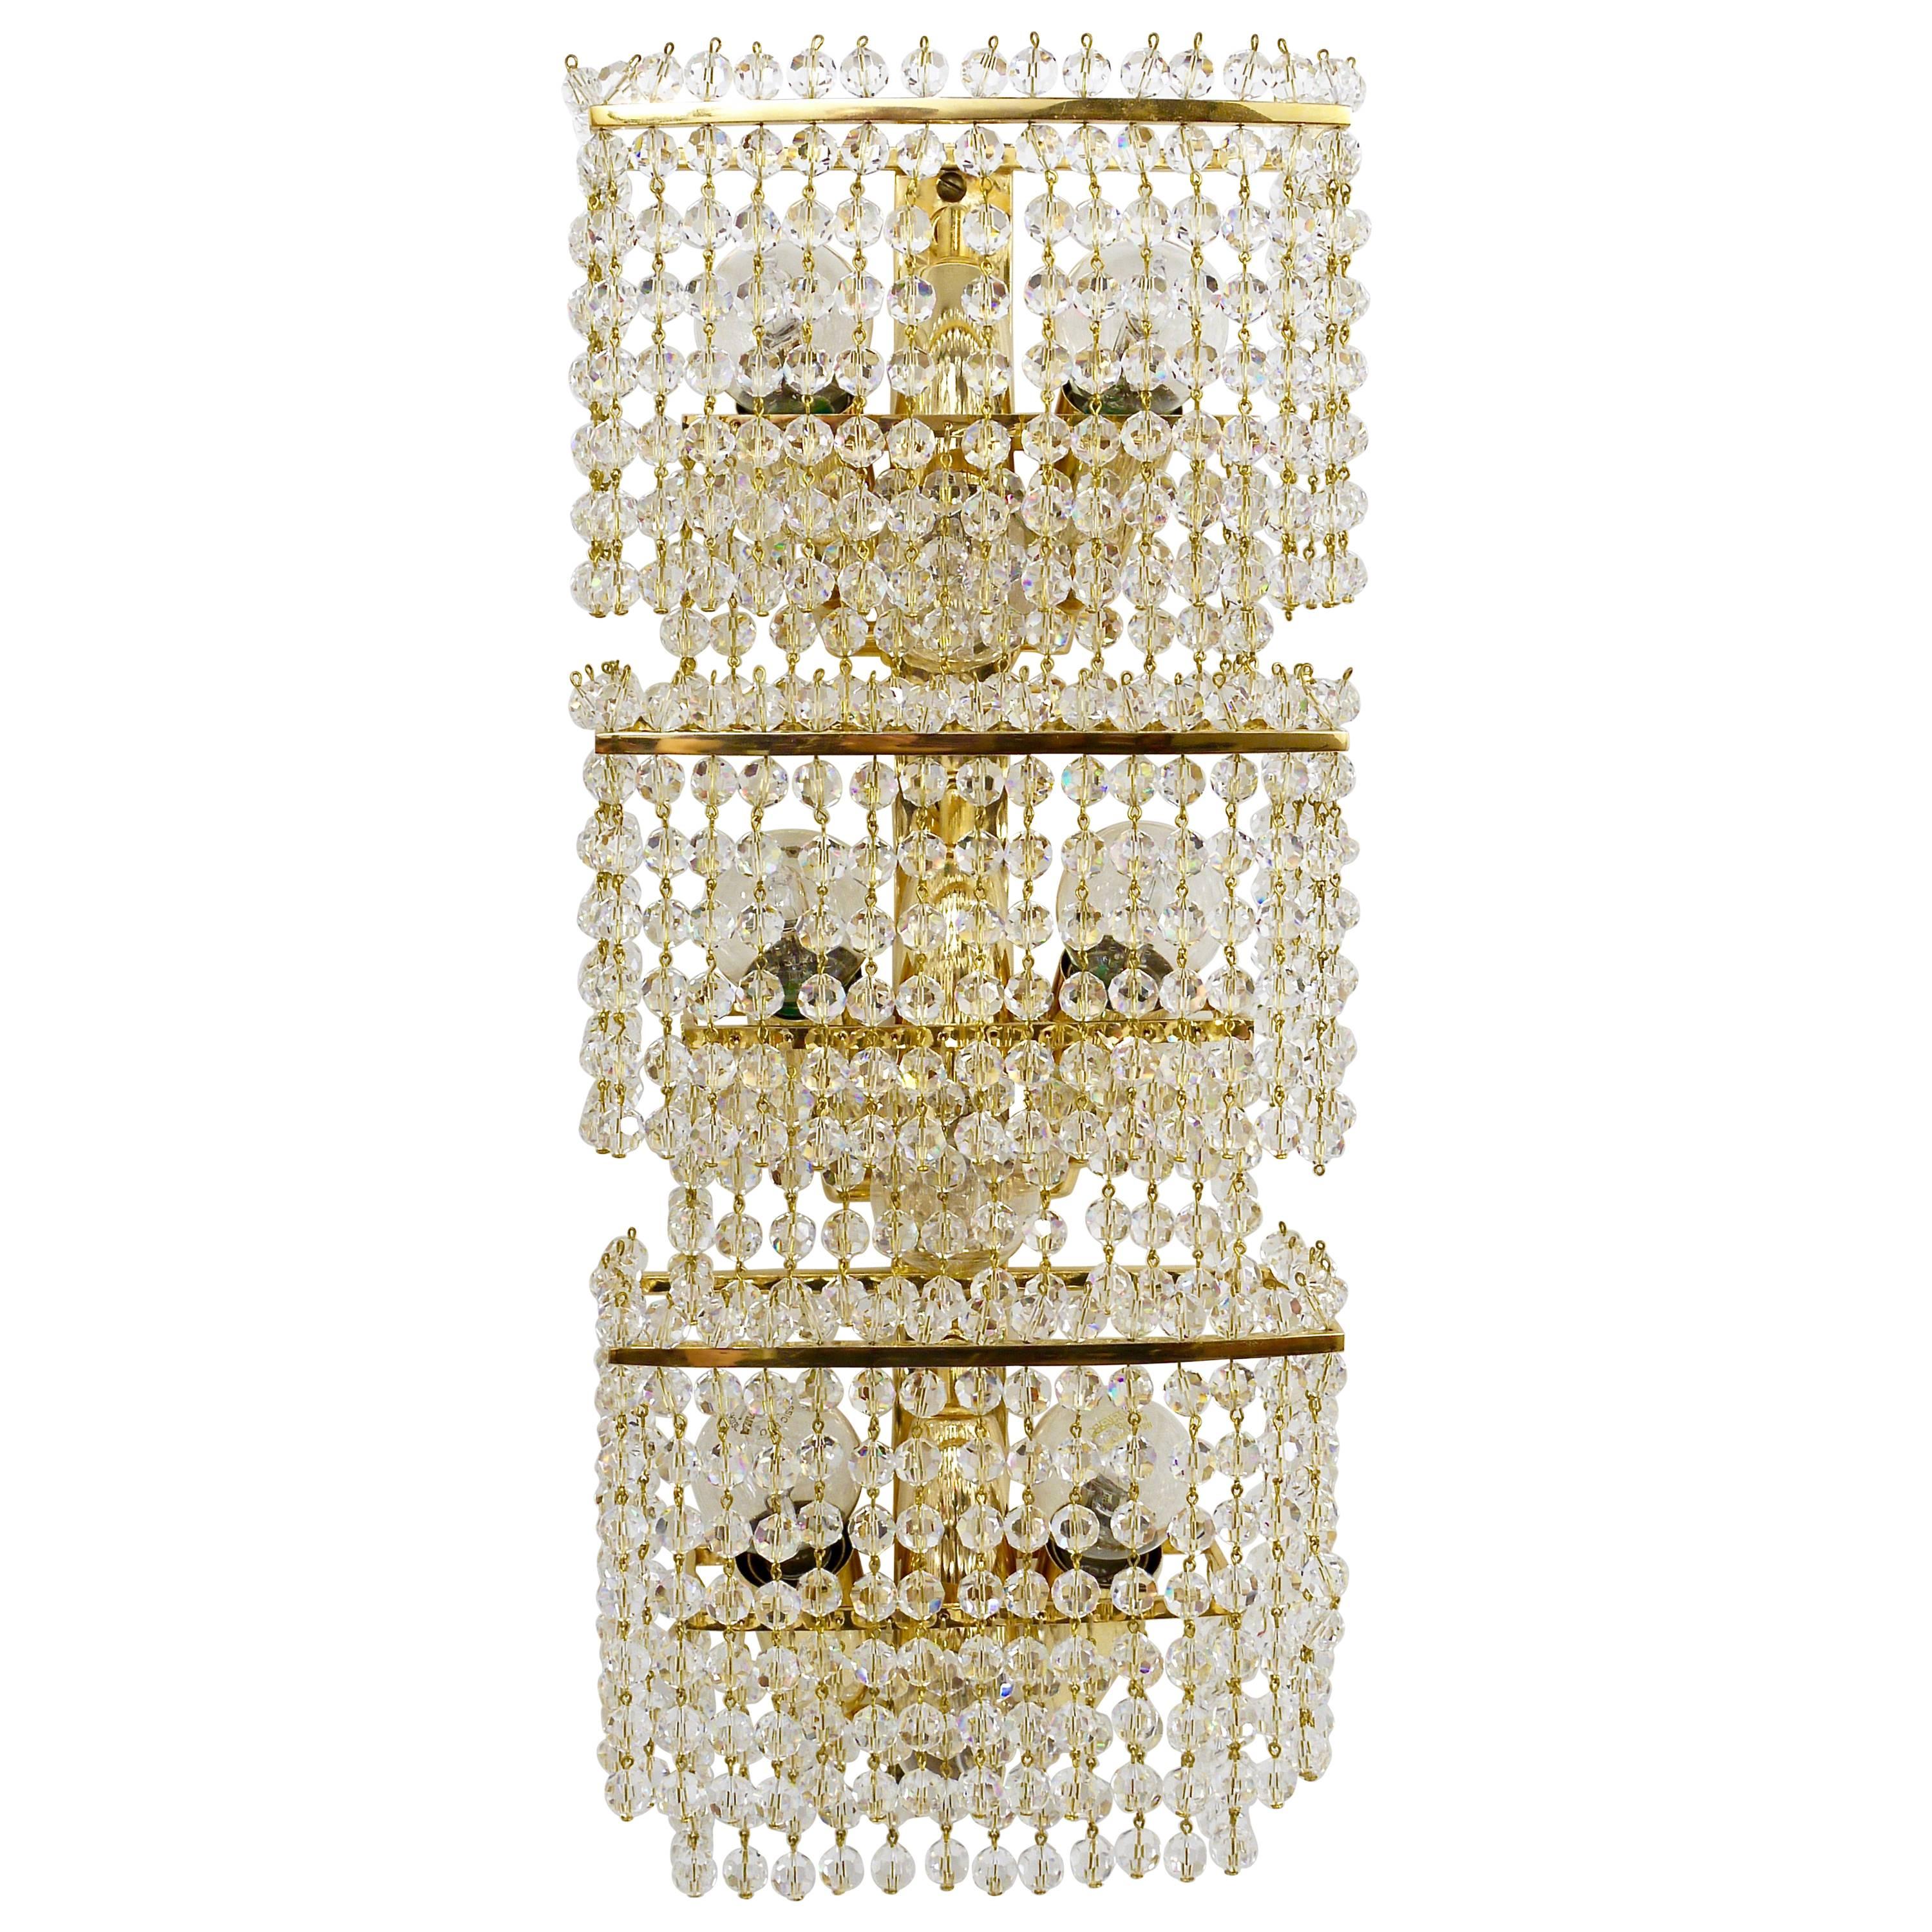 J. & L. Lobmeyr Huge Square Gold-Plated Crystal and Brass Sconce, Austria, 1970s